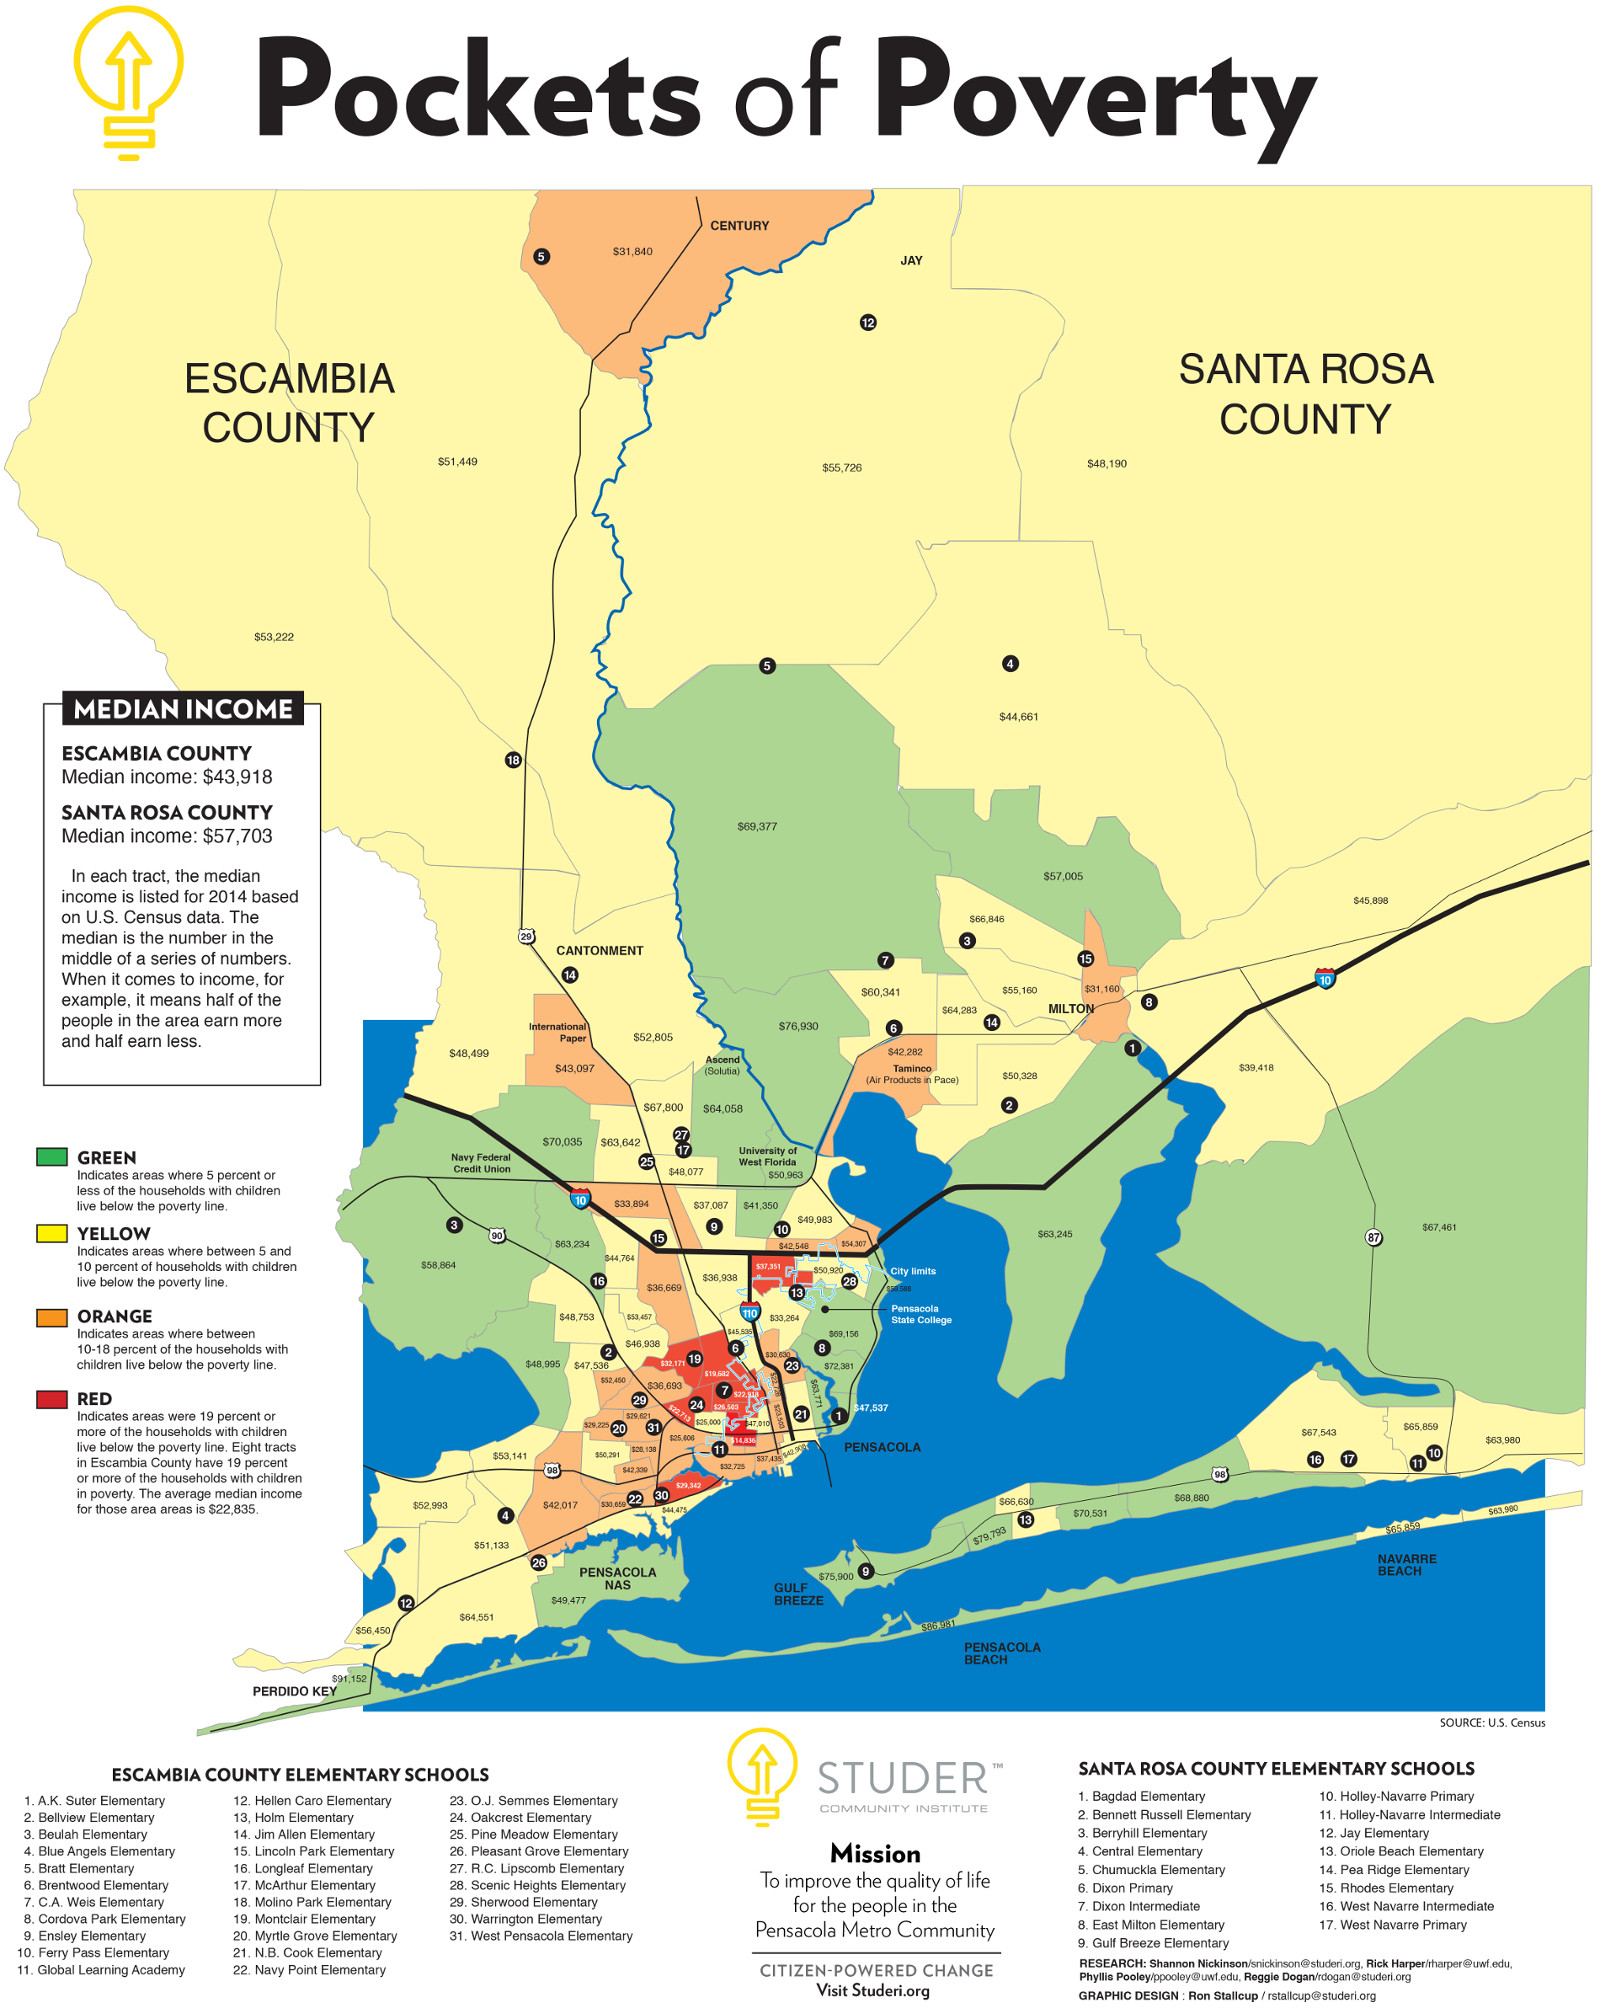 A map of Escambia County showing areas of poverty